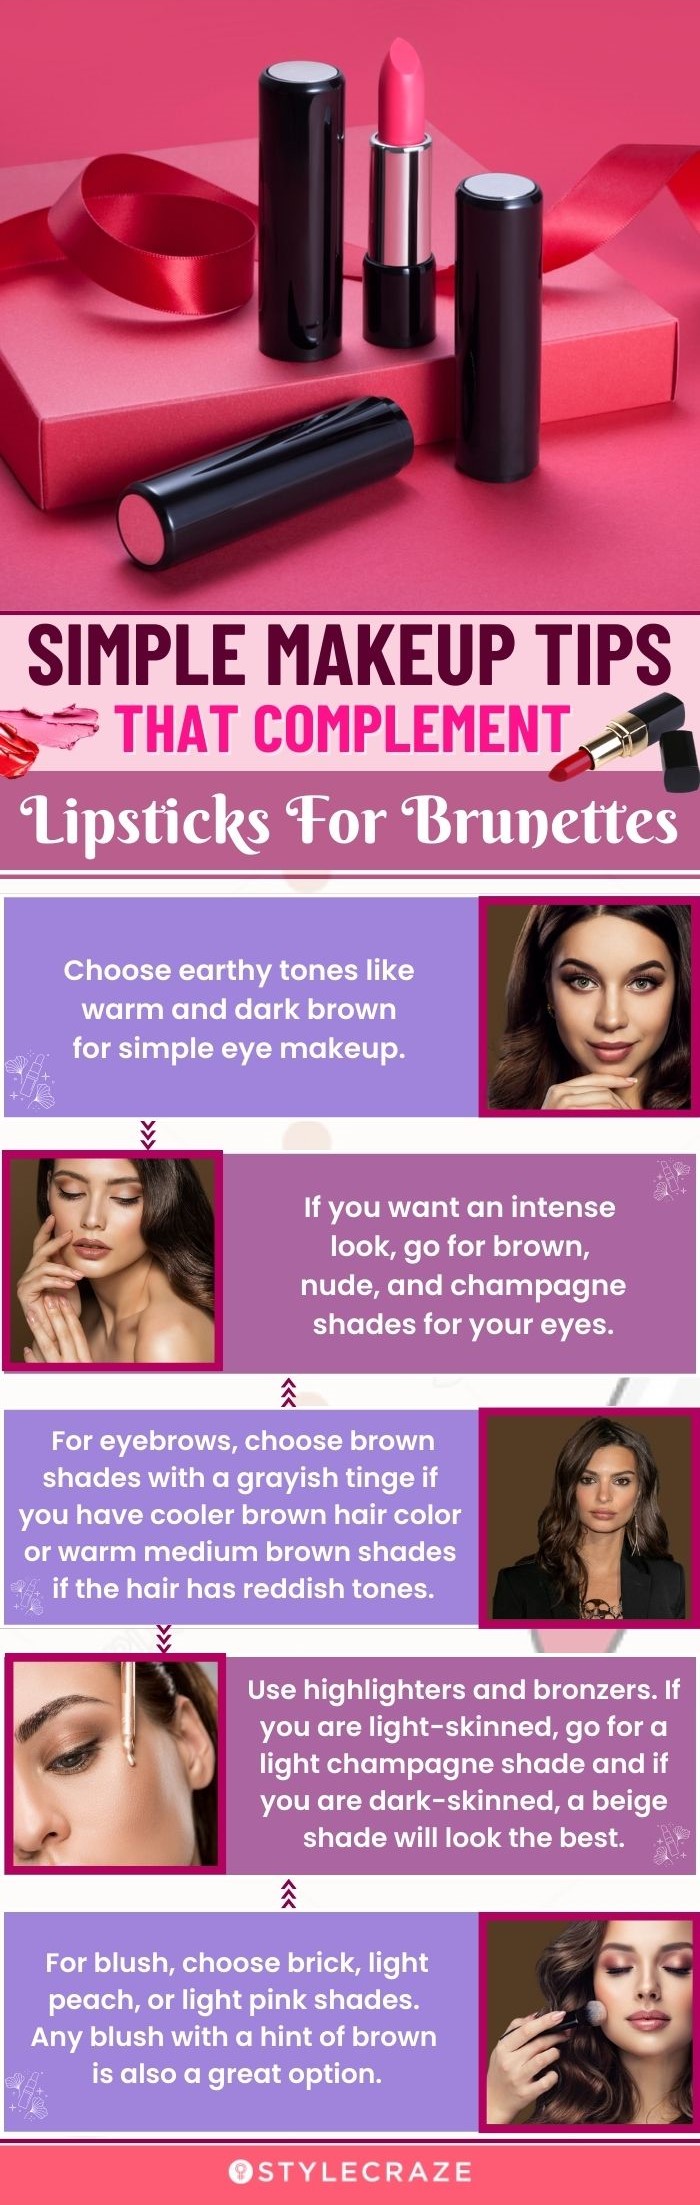 Simple Makeup Tips That Complement Lipsticks For Brunettes (infographic)